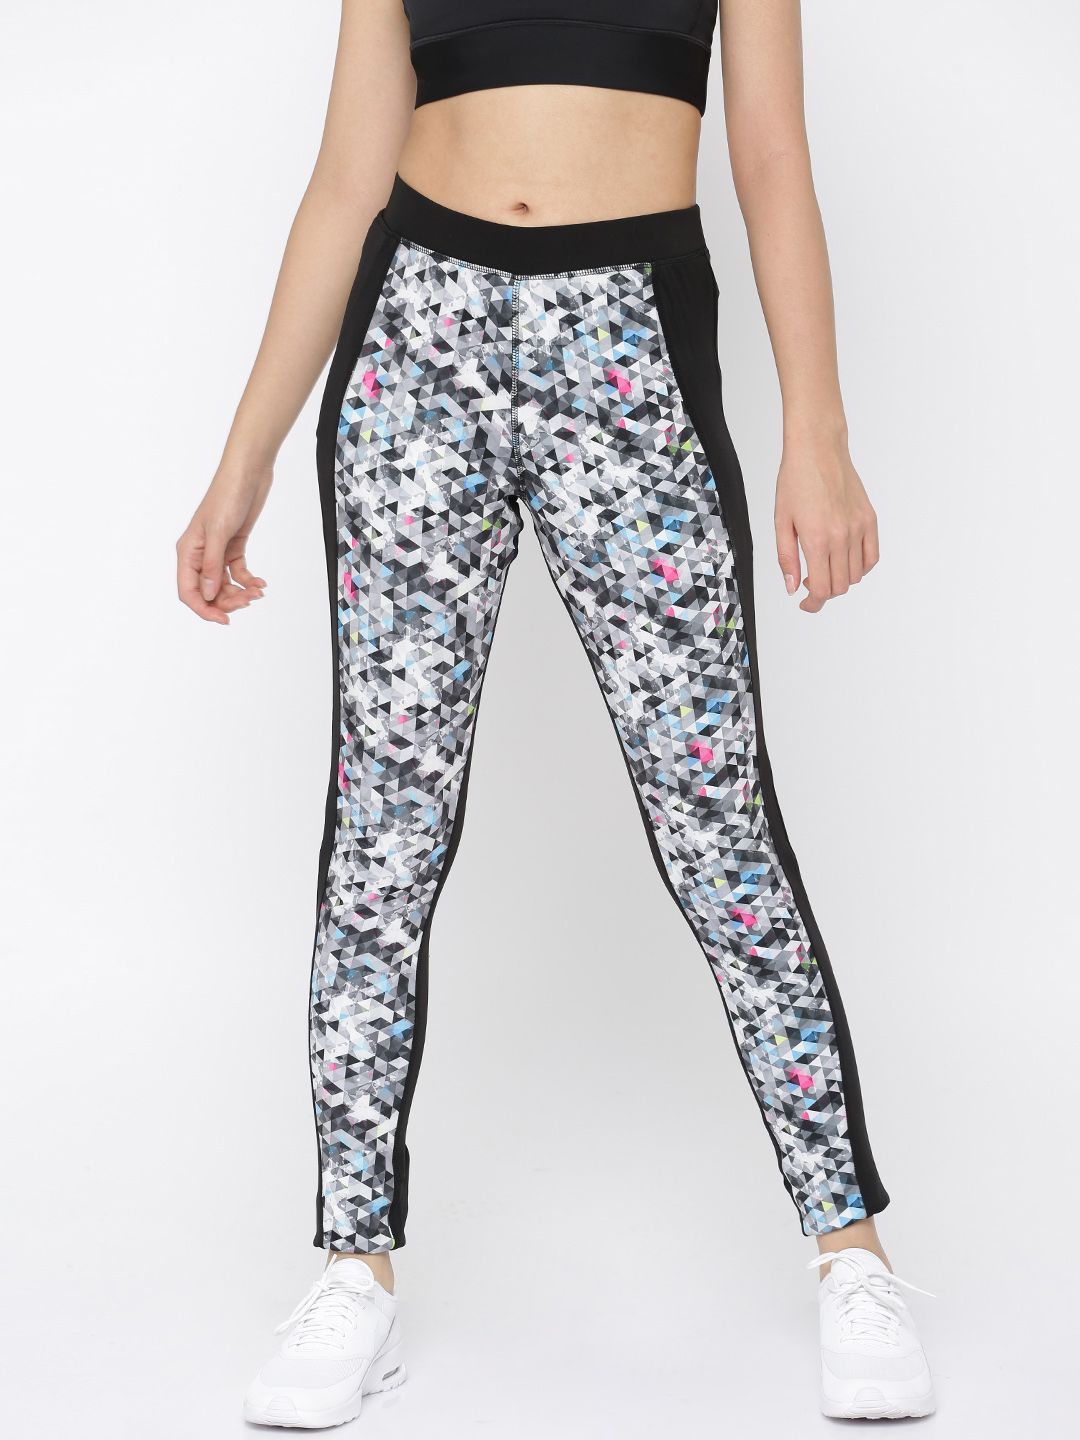 SDL by Sweet Dreams Black & White Printed Tights Price in India